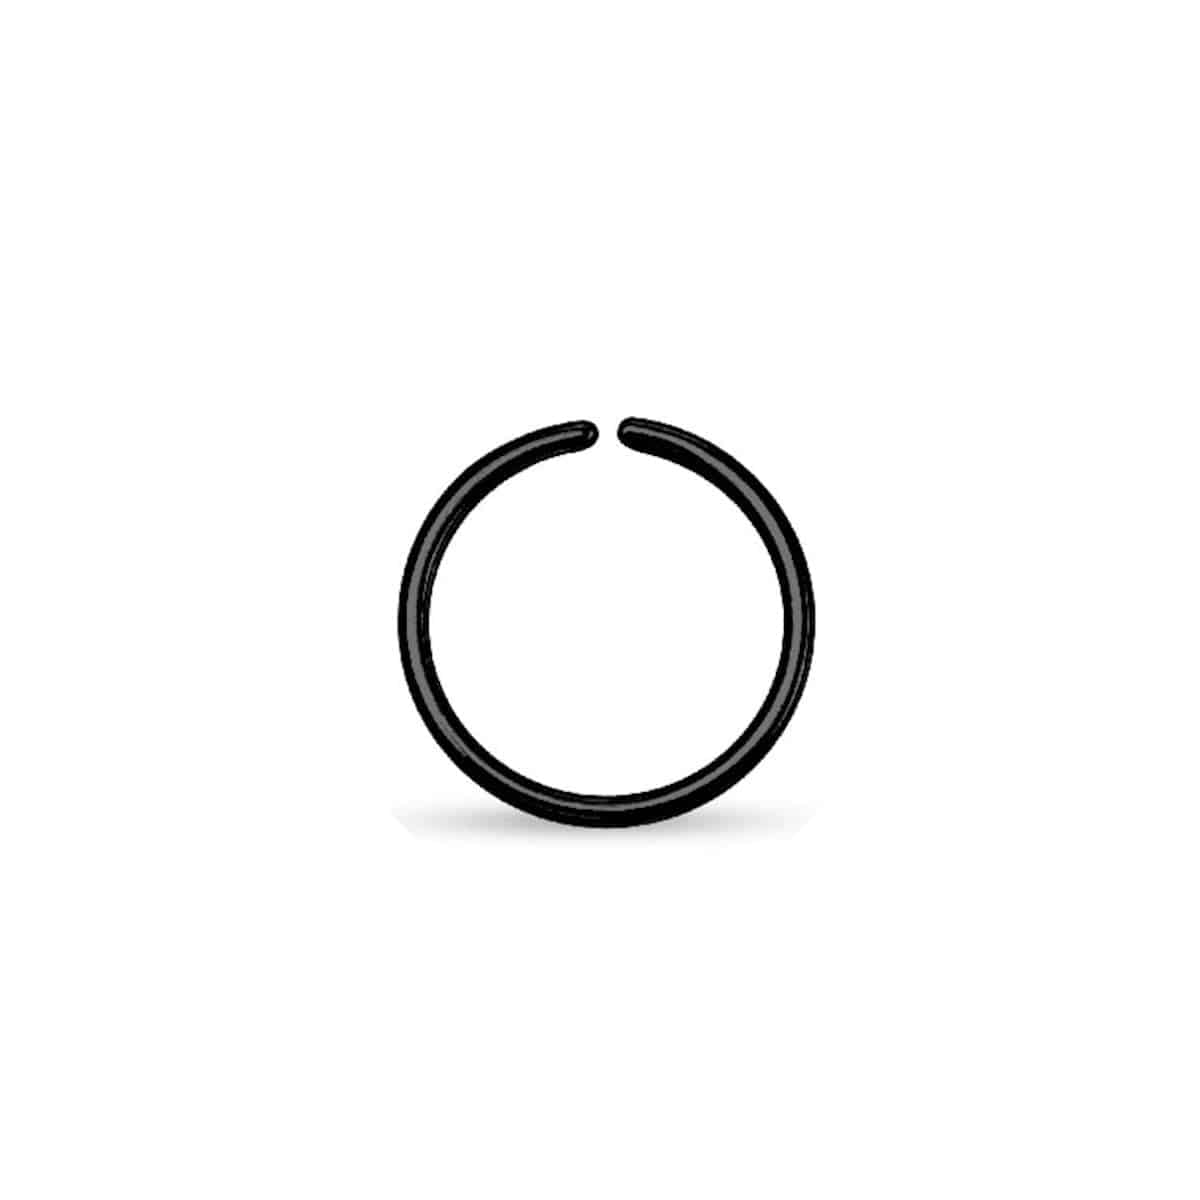 Titanium Anodized over Steel Bendable Hoop Ring